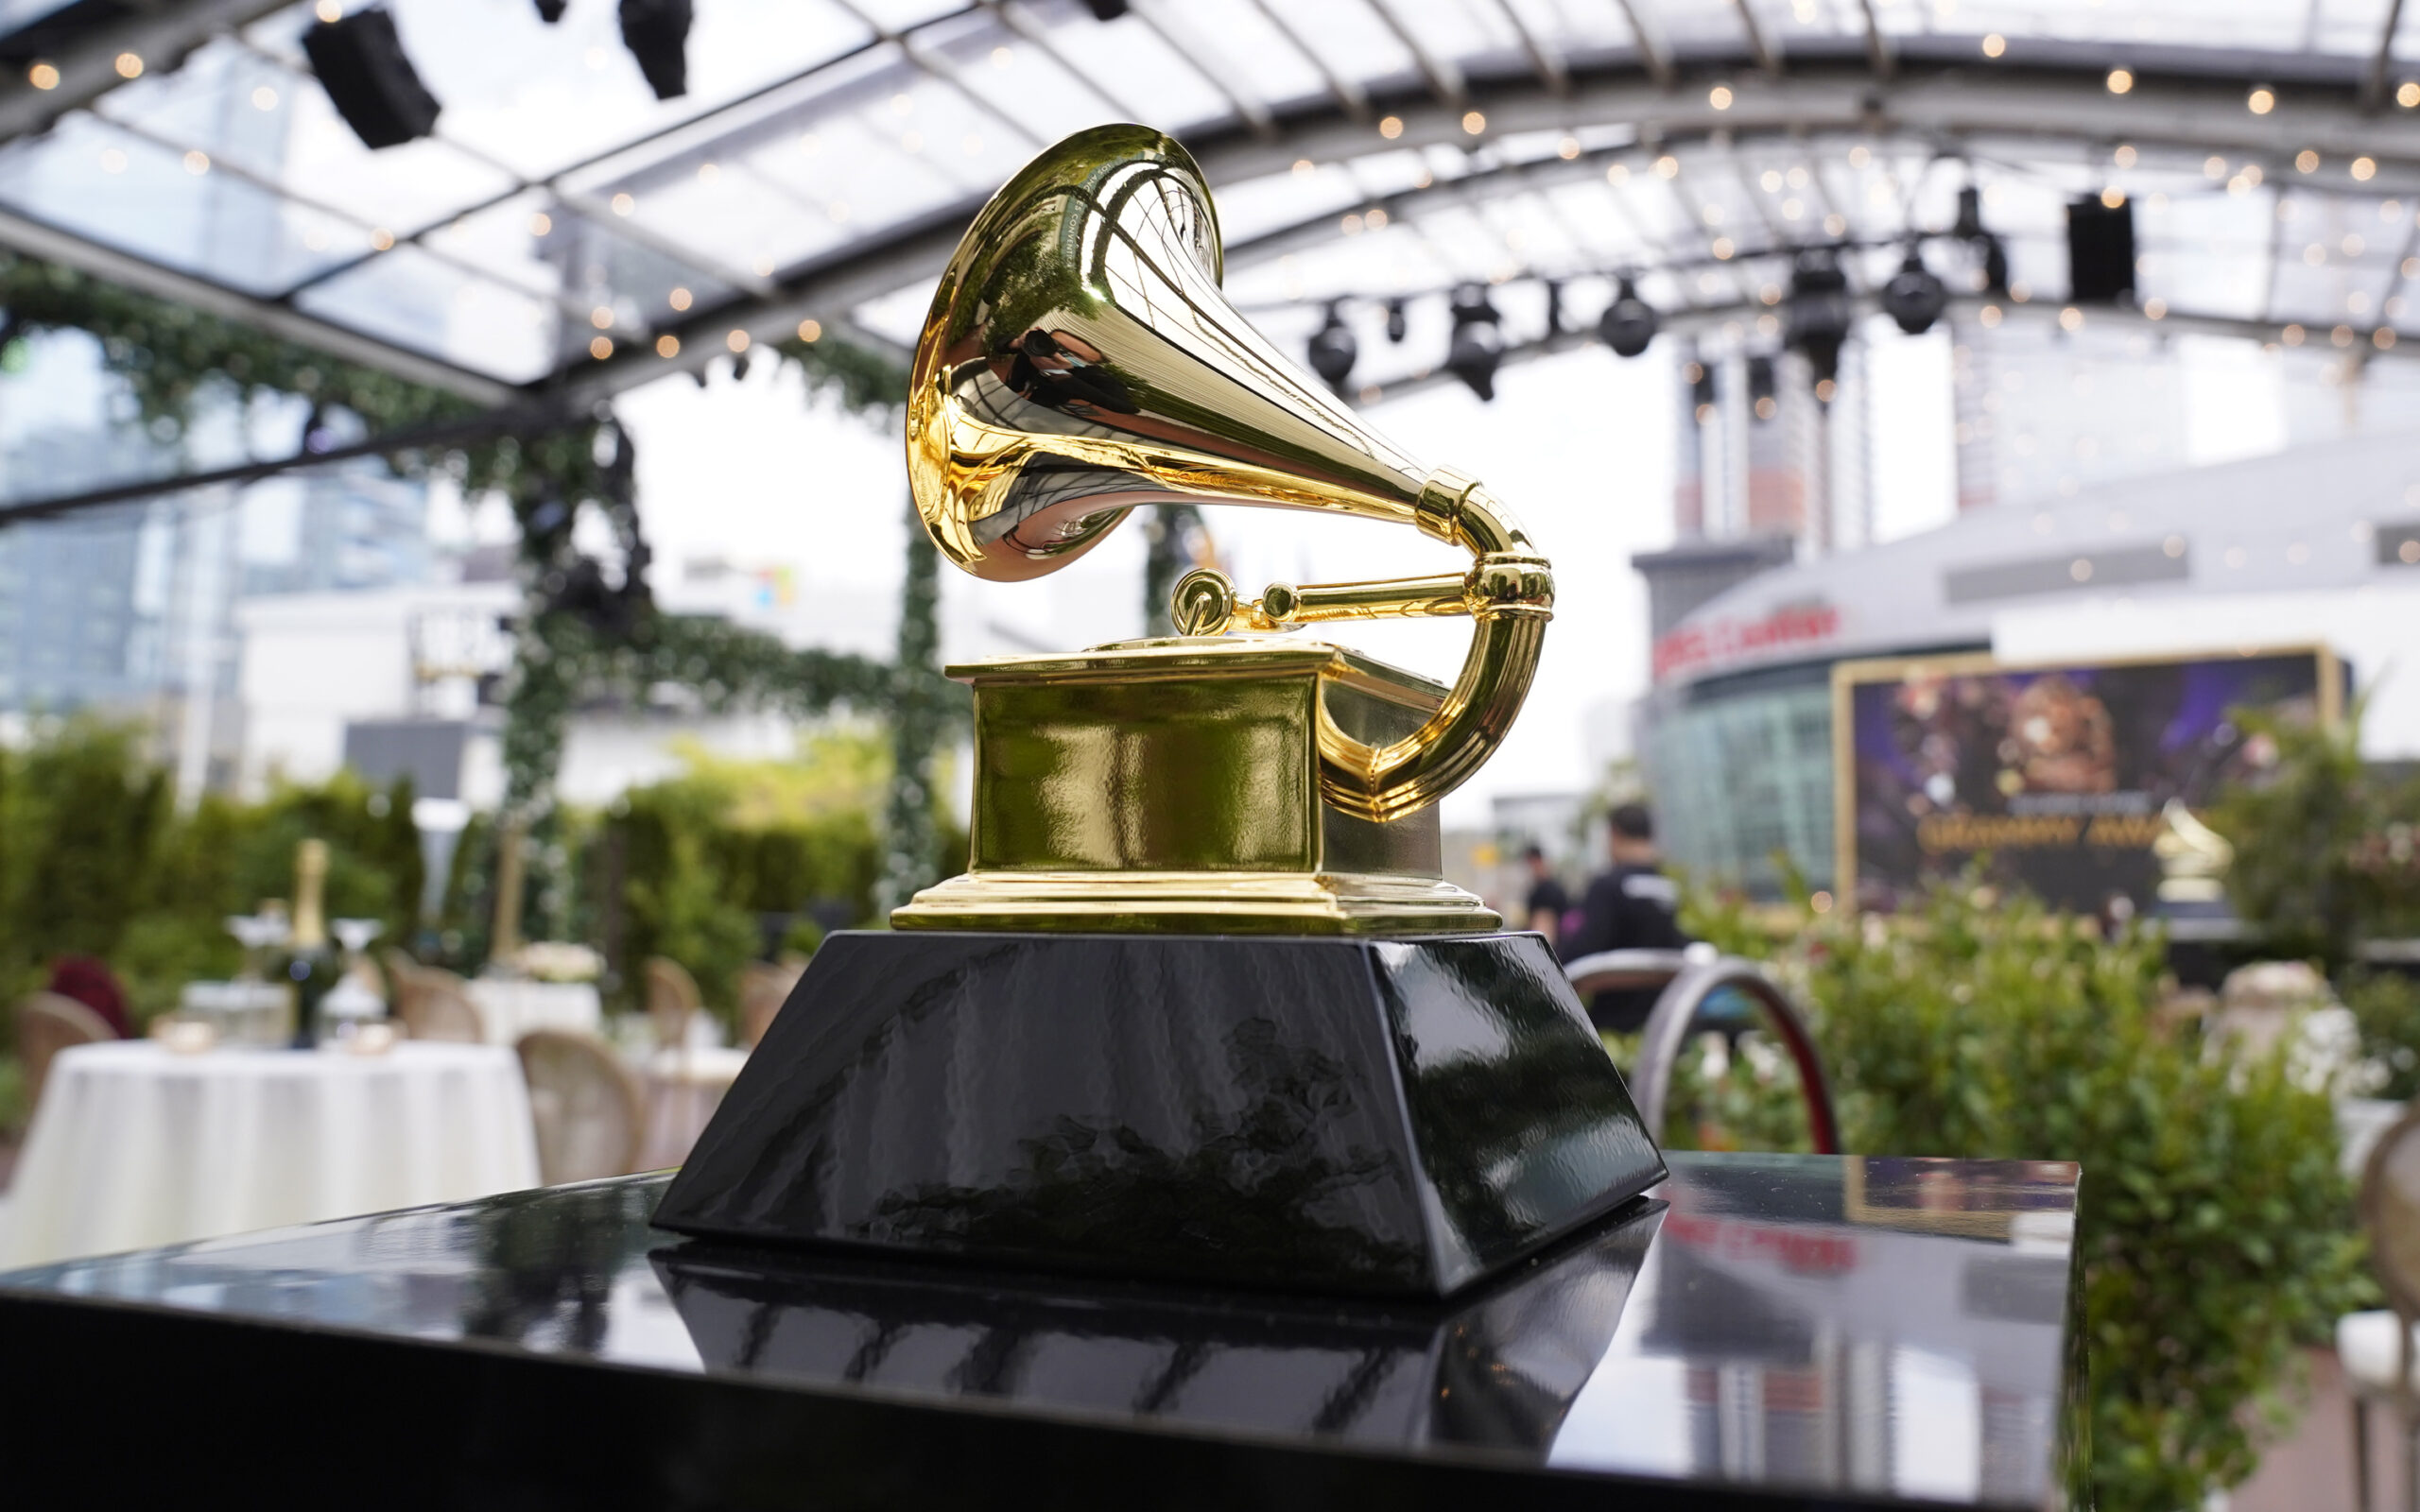 FILE - A decorative grammy is seen before the start of the 63rd annual Grammy Awards at the Los Angeles Convention Center on Sunday, March 14, 2021. The upcoming Grammy Awards have been postponed due to what organizers called "too many risks" due to the omicron variant. The ceremony had been scheduled for Jan. 31st in Los Angeles with a live audience and performances. (AP Photo/Chris Pizzello, File)